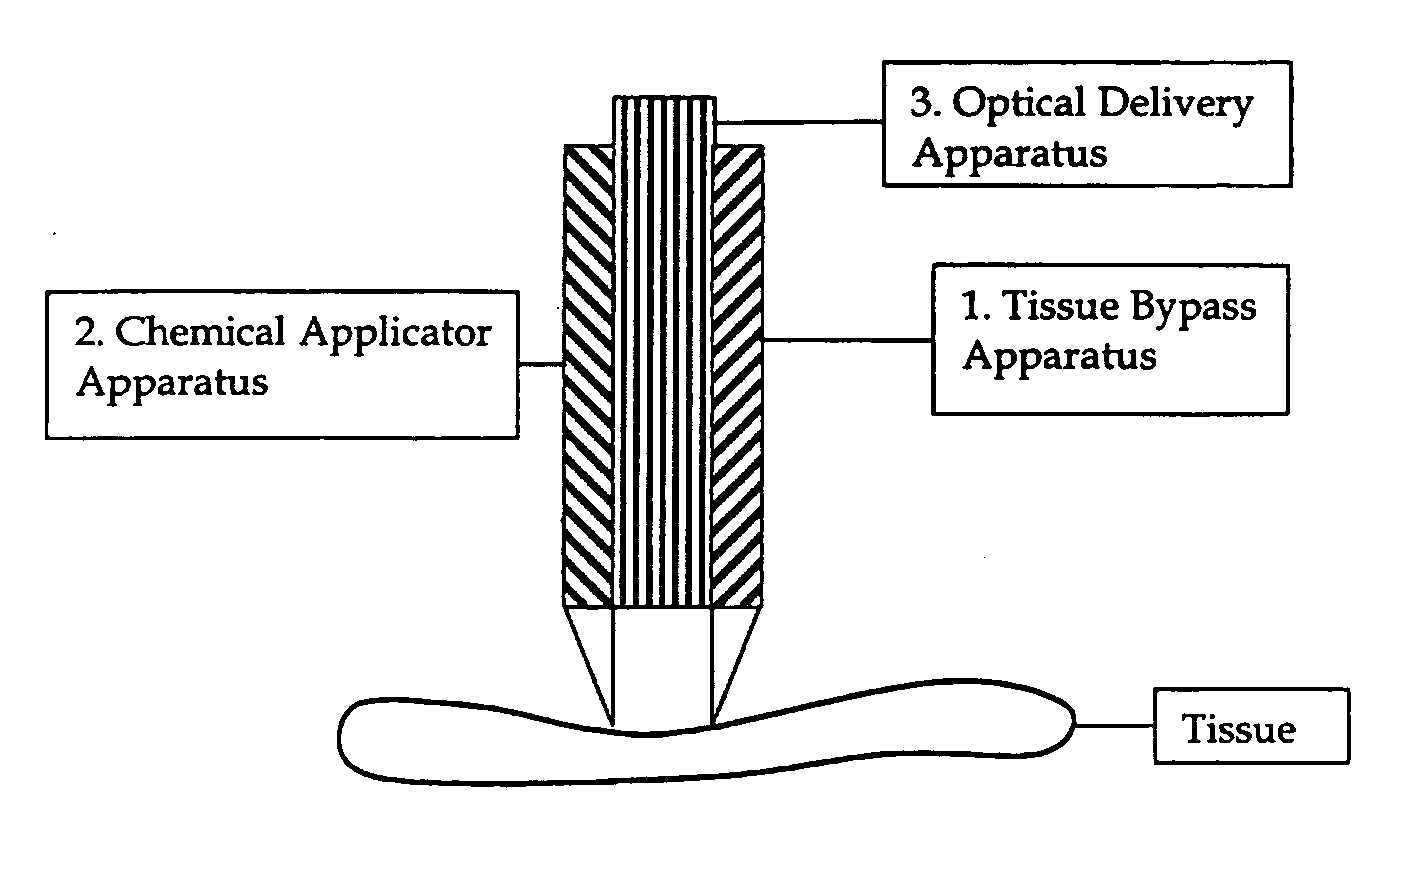 Method and apparatus to enhance optical transparency of biological tissues